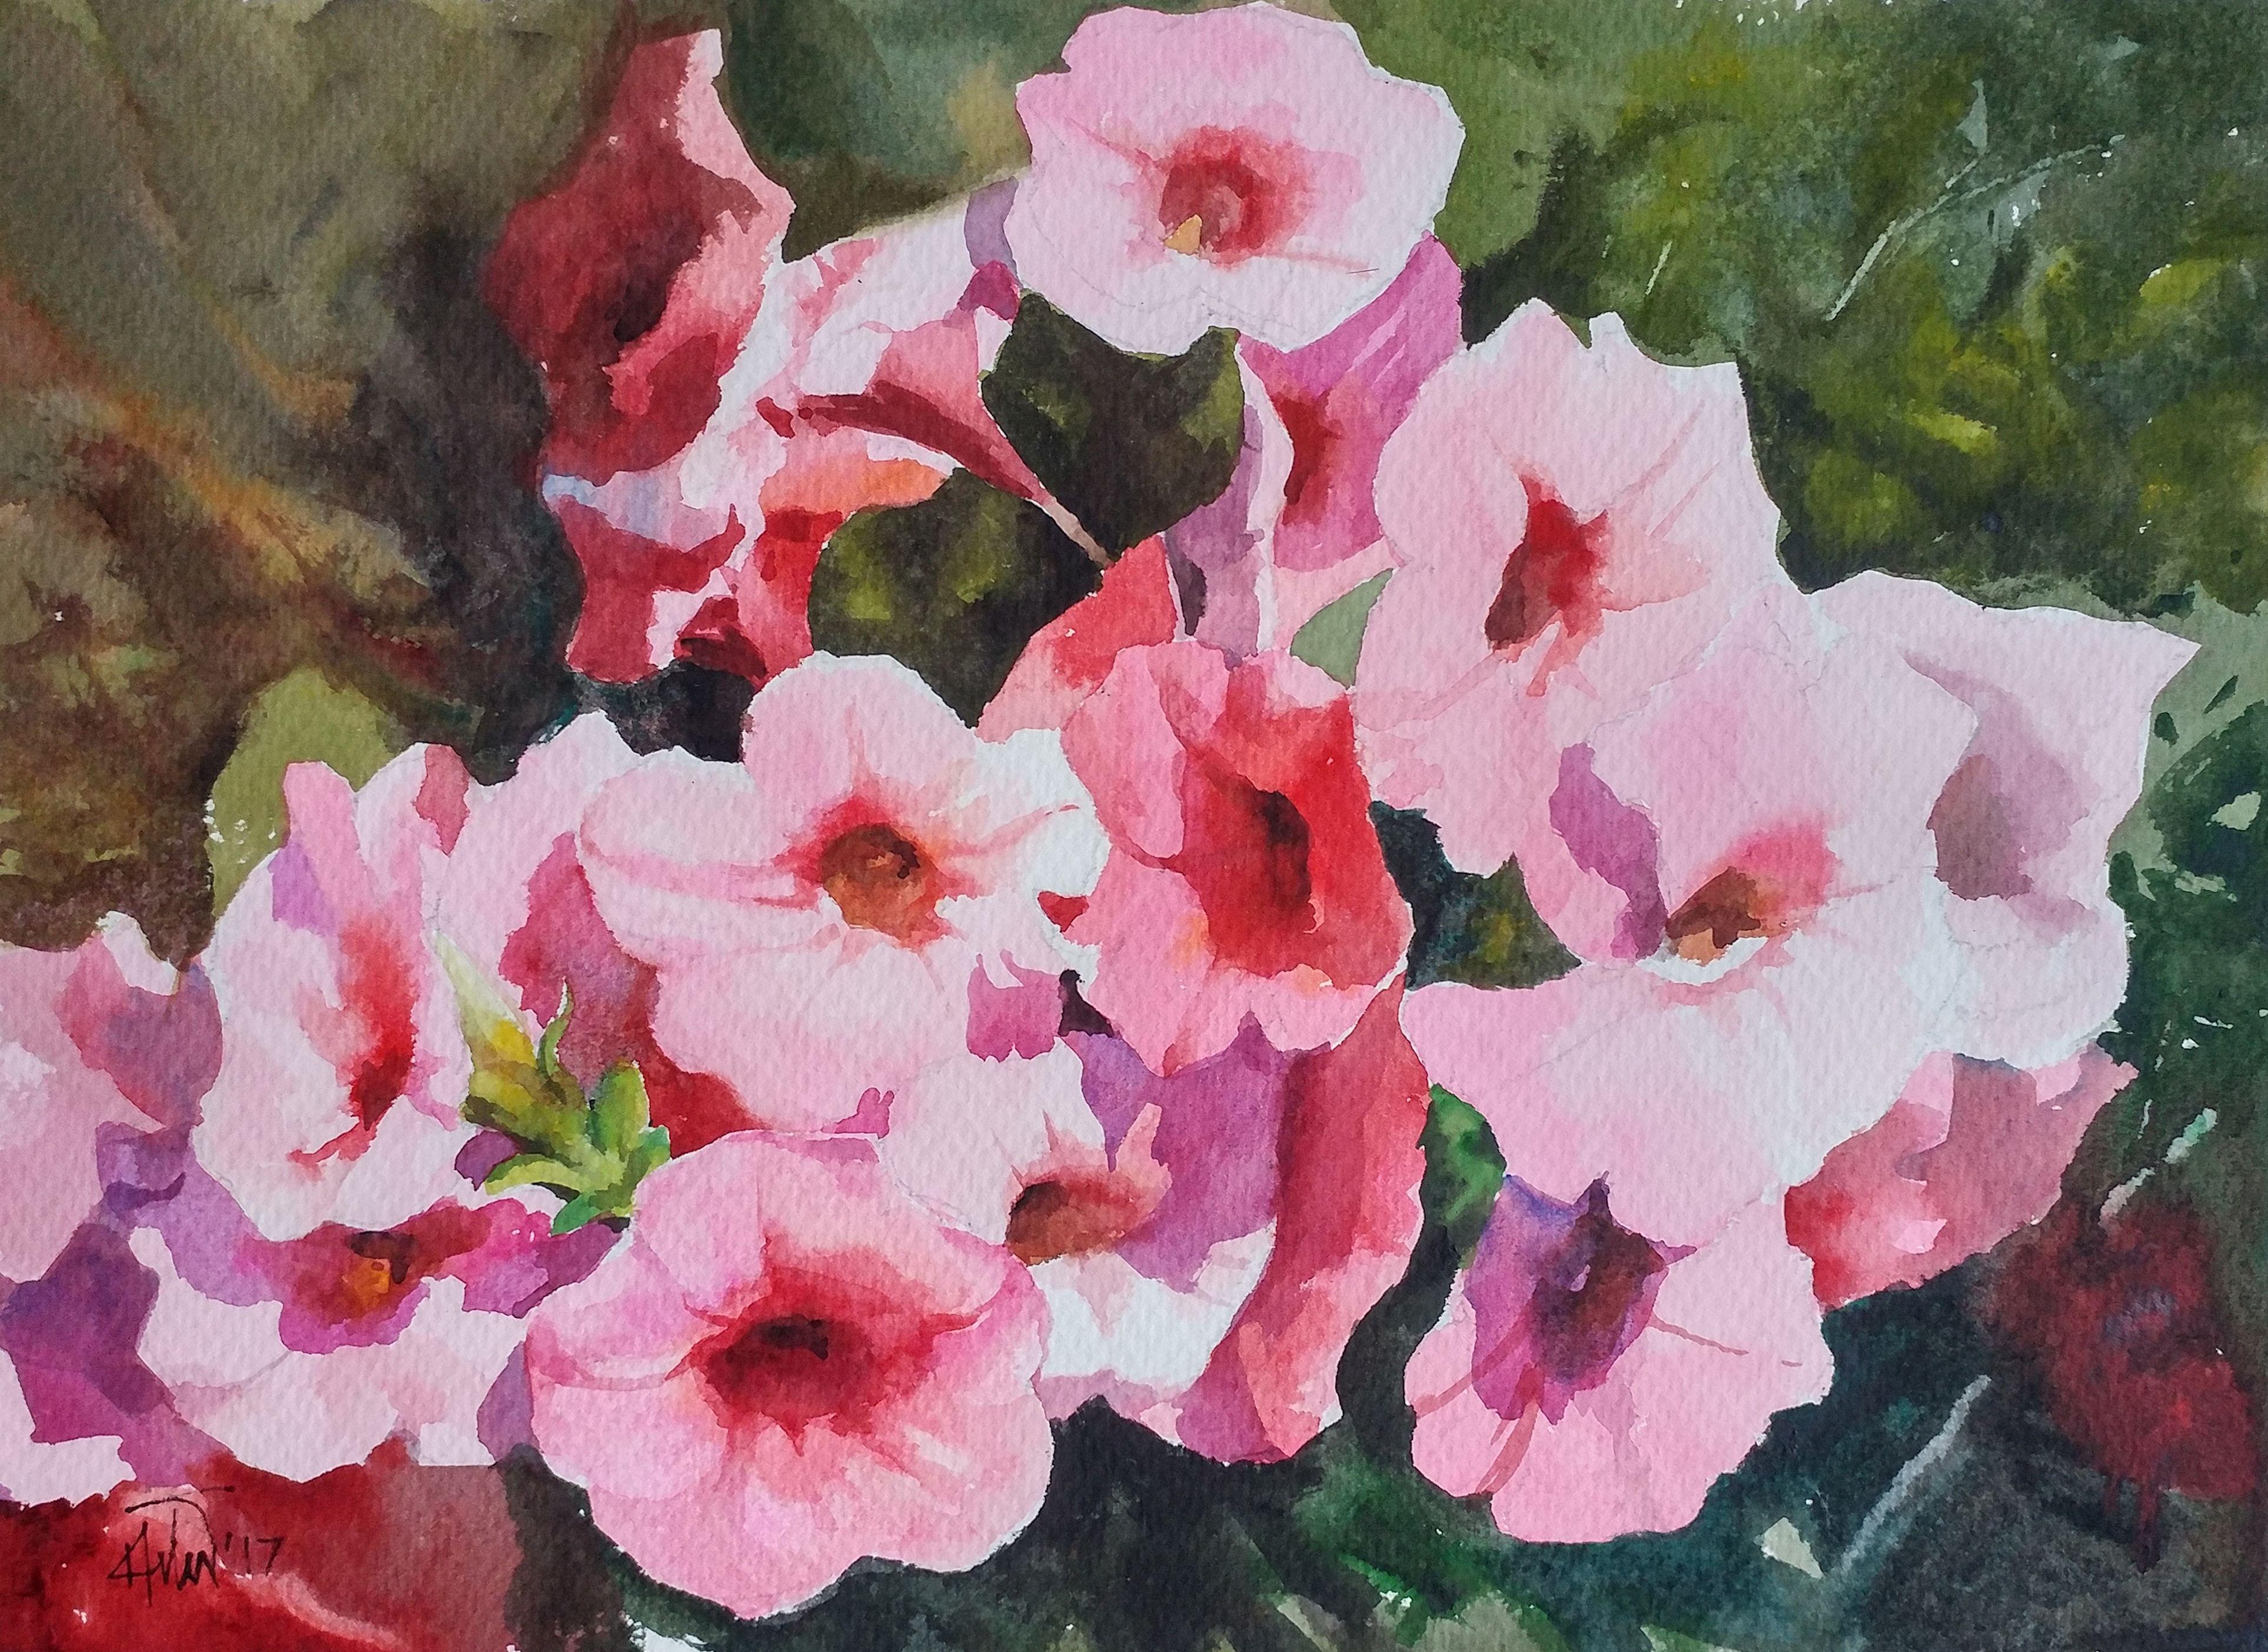 FLOWER_08, Painting, Watercolor on Watercolor Paper - Art by Helal Uddin